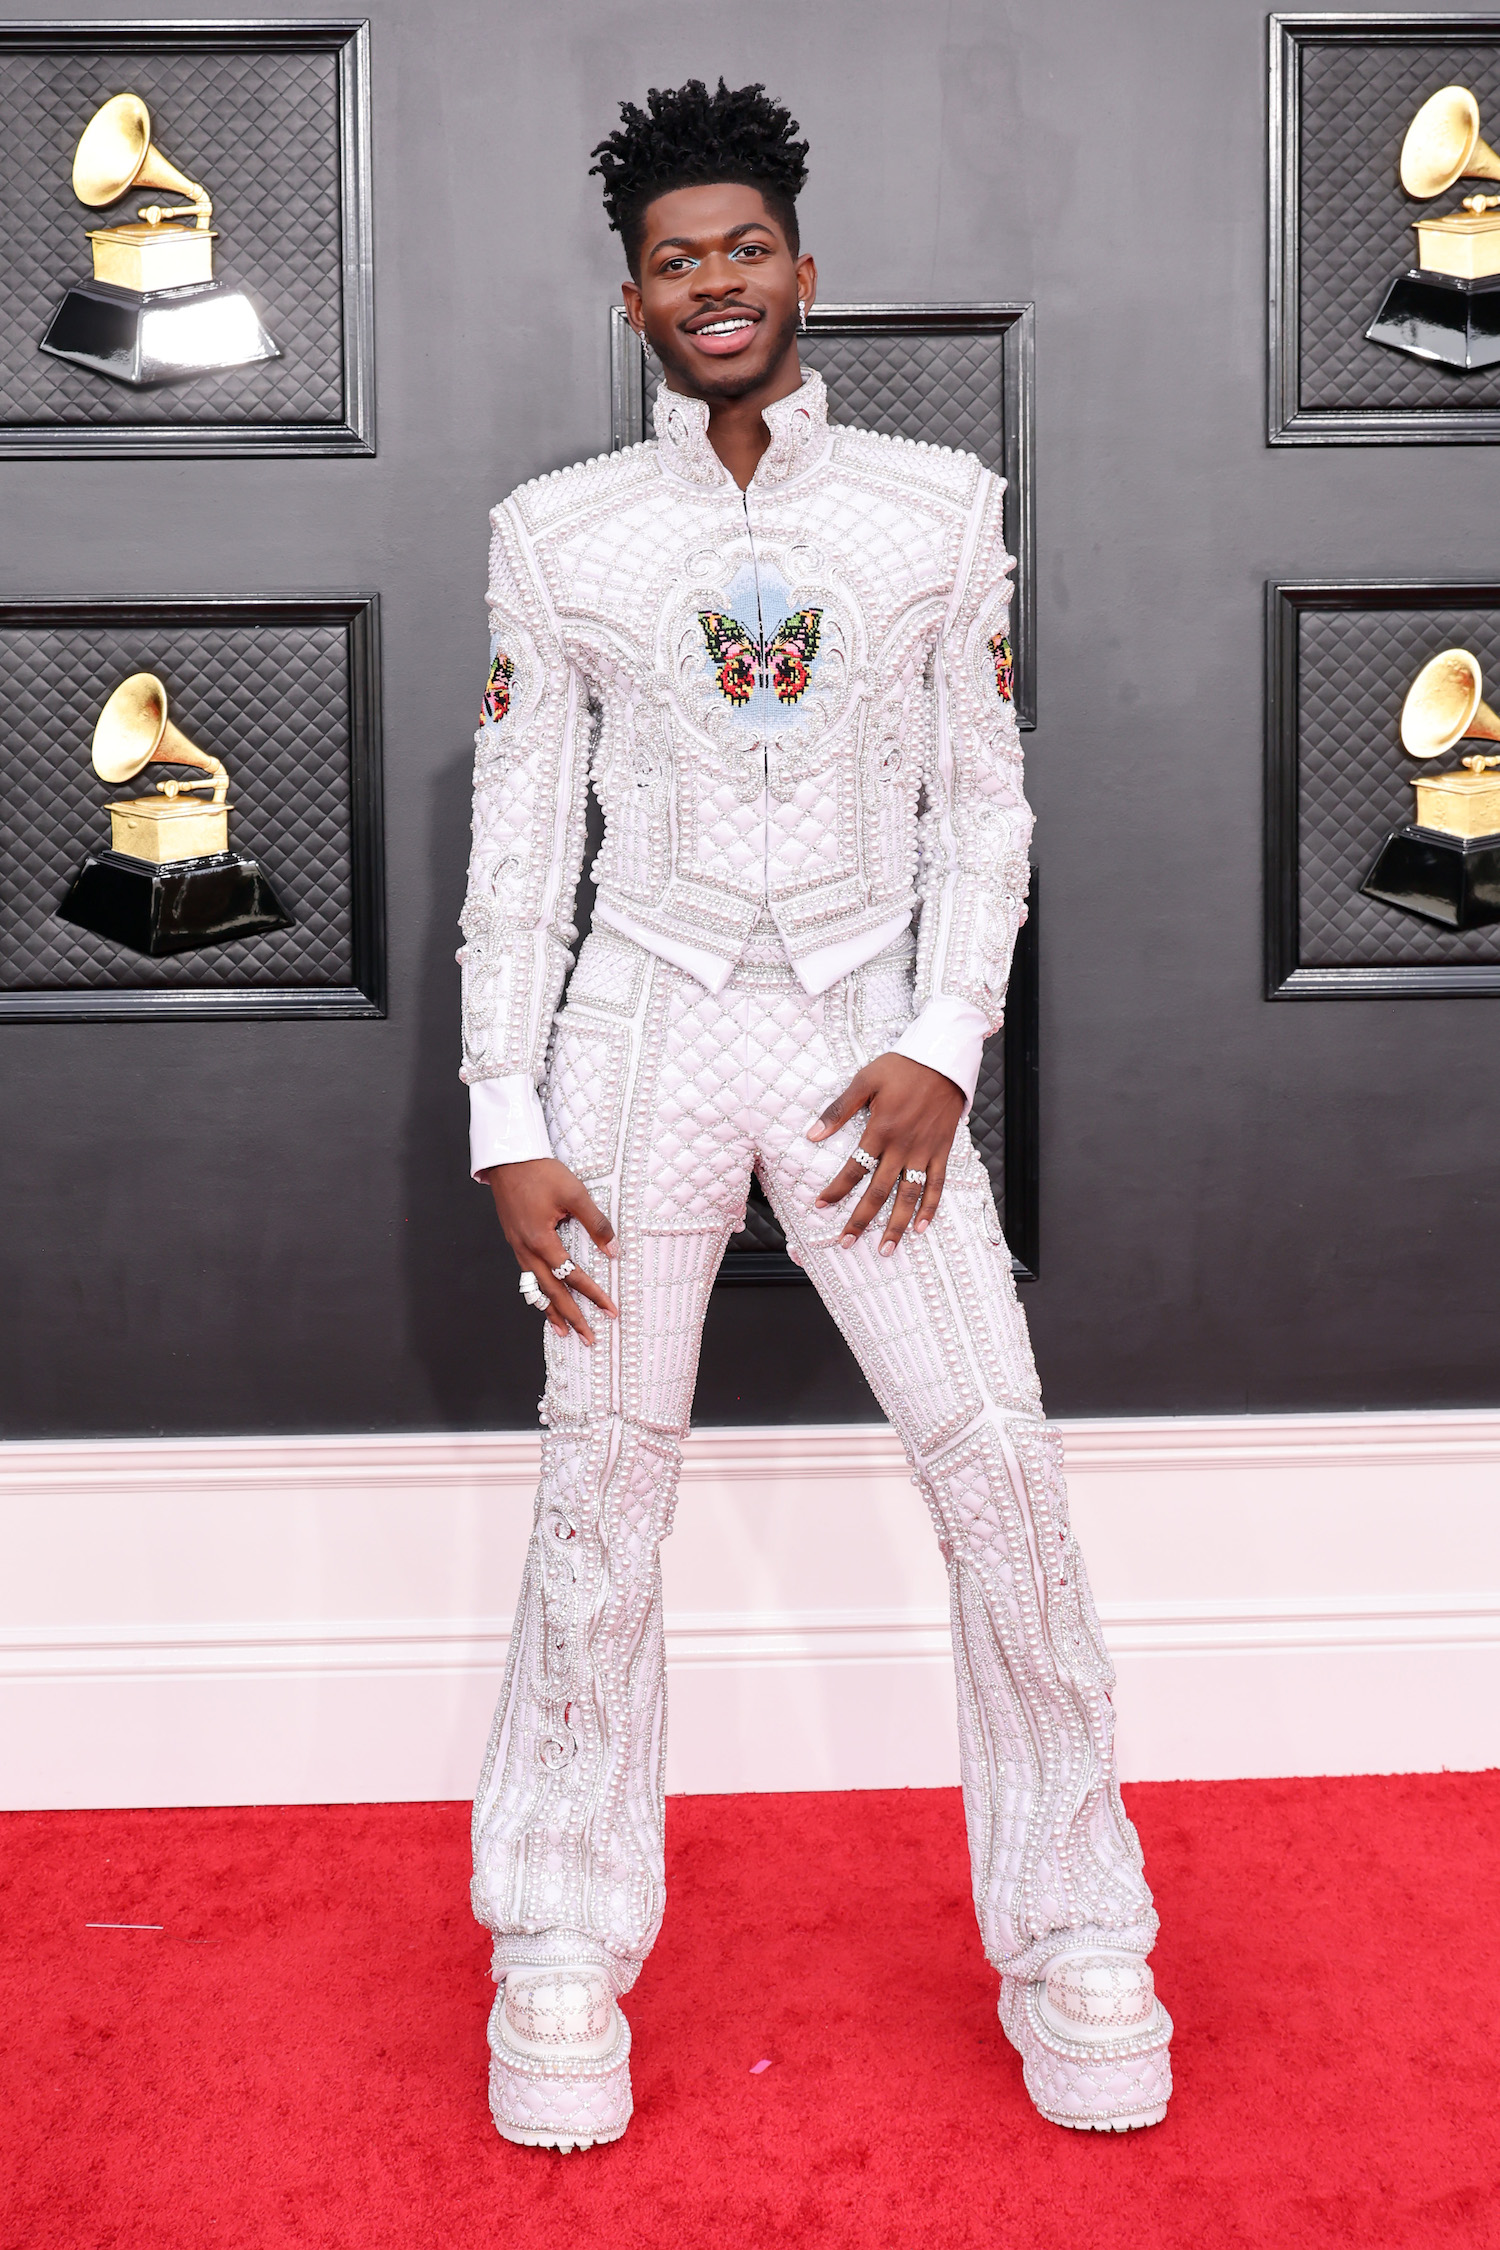 Lil Nas X at the Grammys 2022